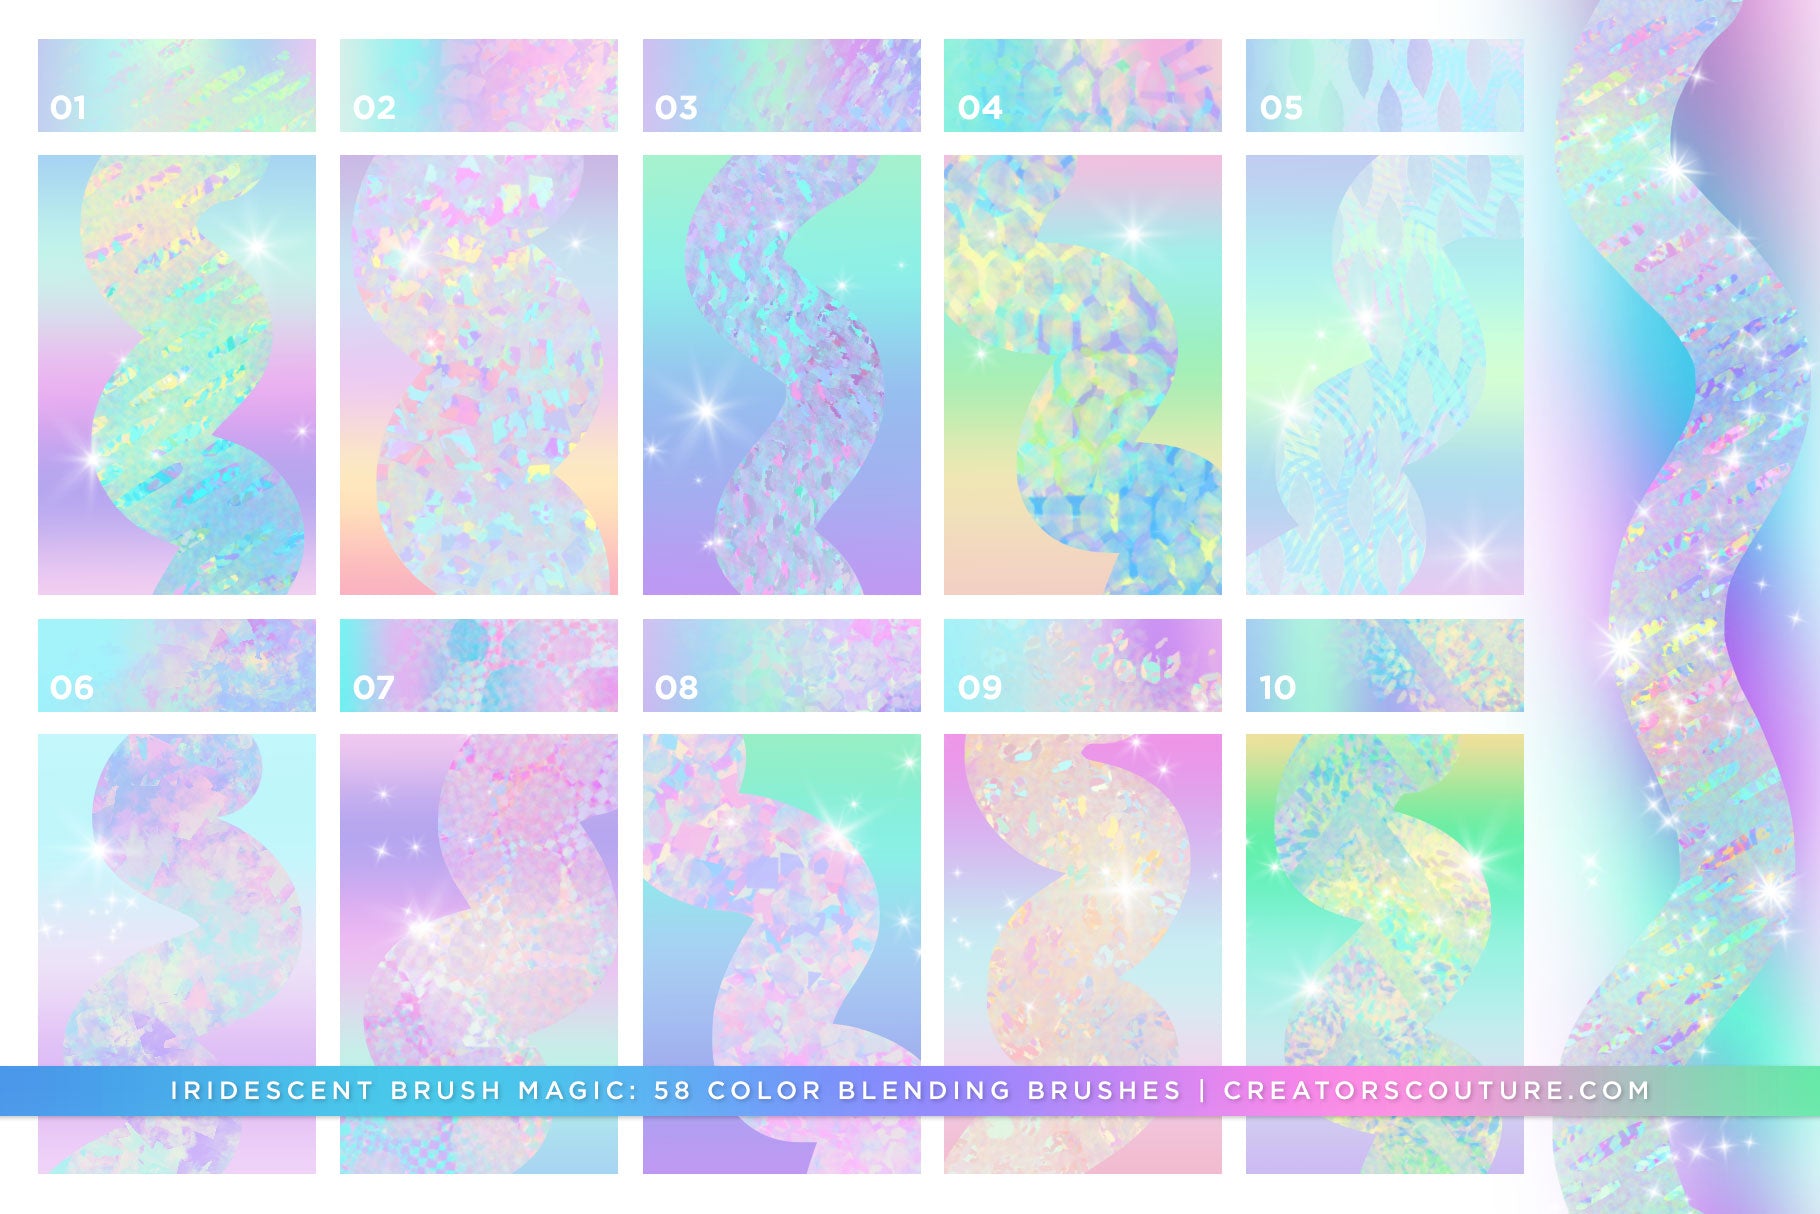 photoshop brushes for instant iridescent and holographic effects and brush strokes, brush preview chart 1